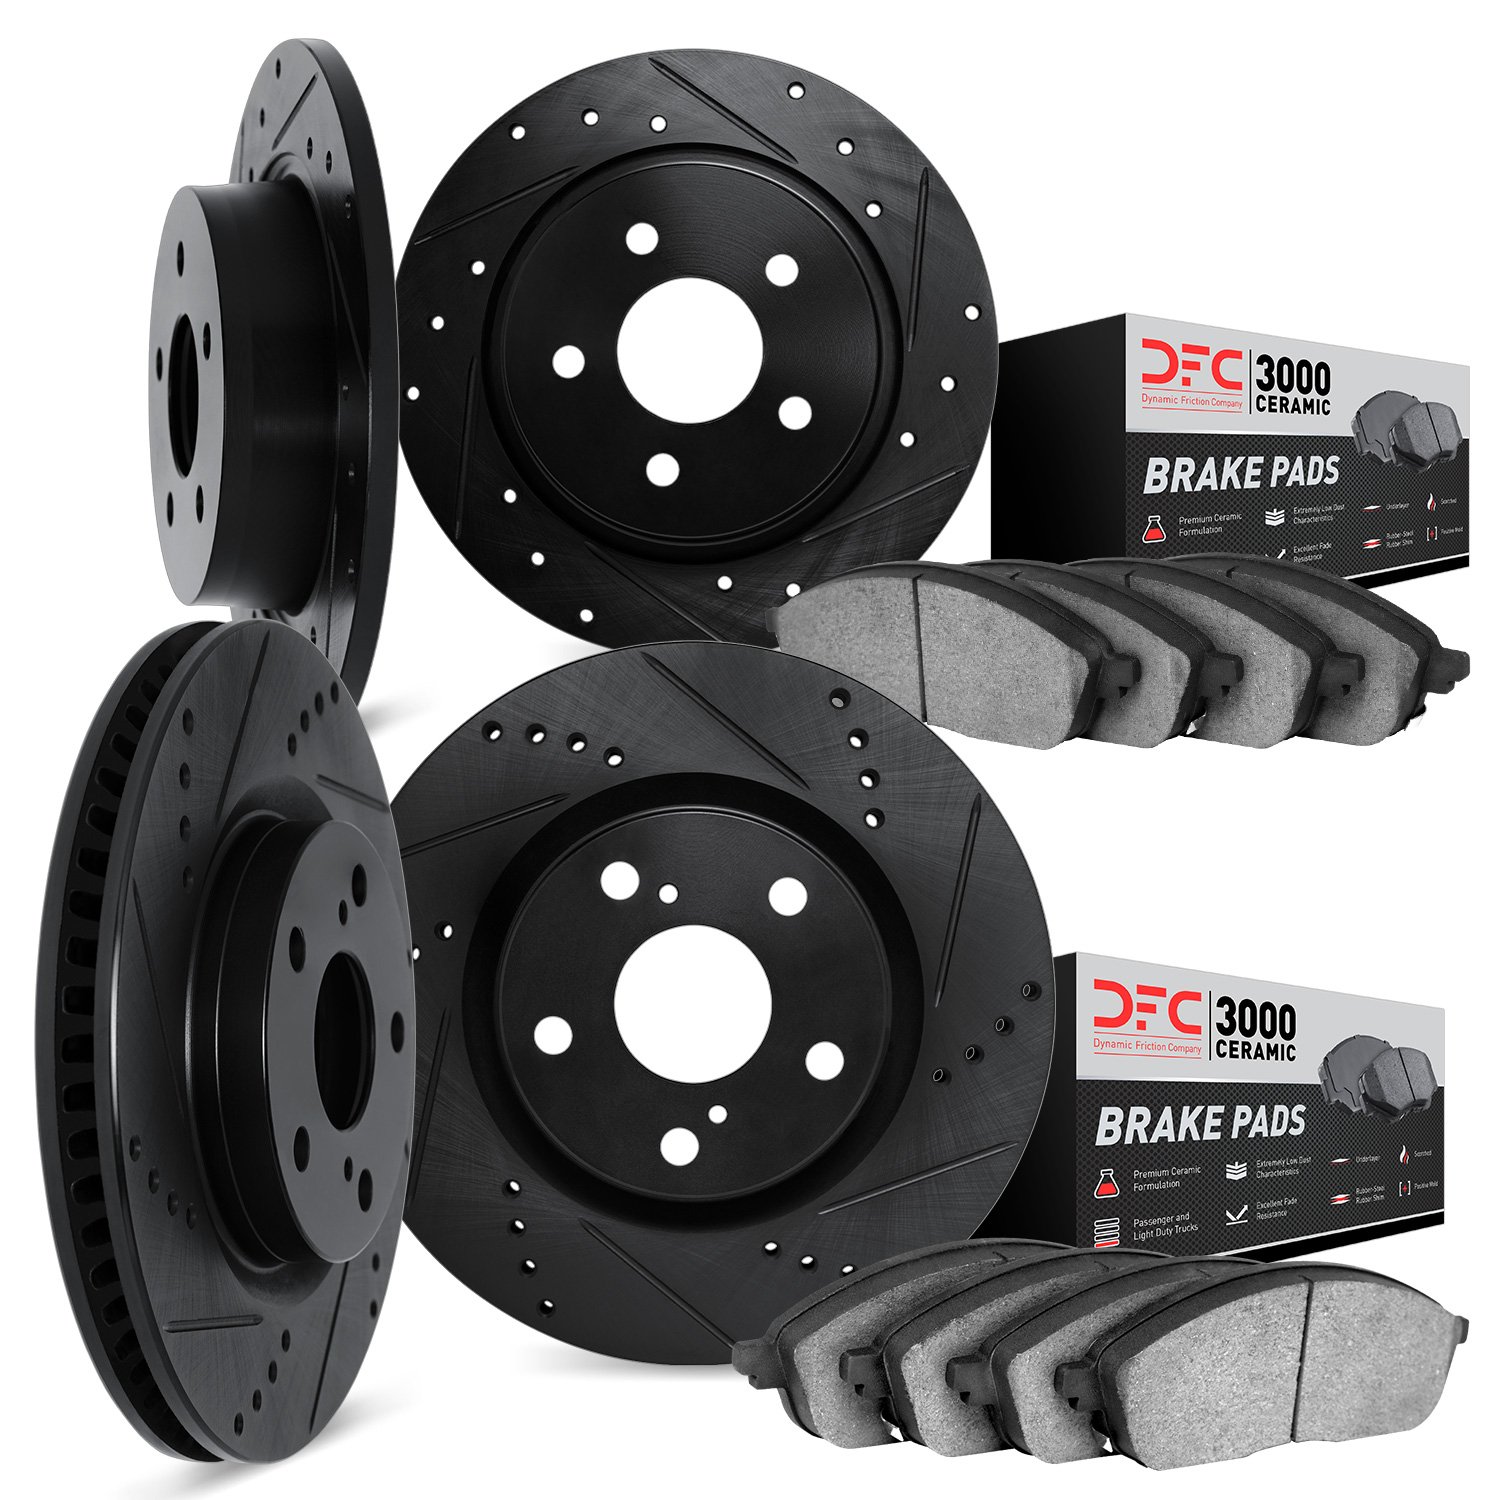 8304-76077 Drilled/Slotted Brake Rotors with 3000-Series Ceramic Brake Pads Kit [Black], Fits Select Lexus/Toyota/Scion, Positio